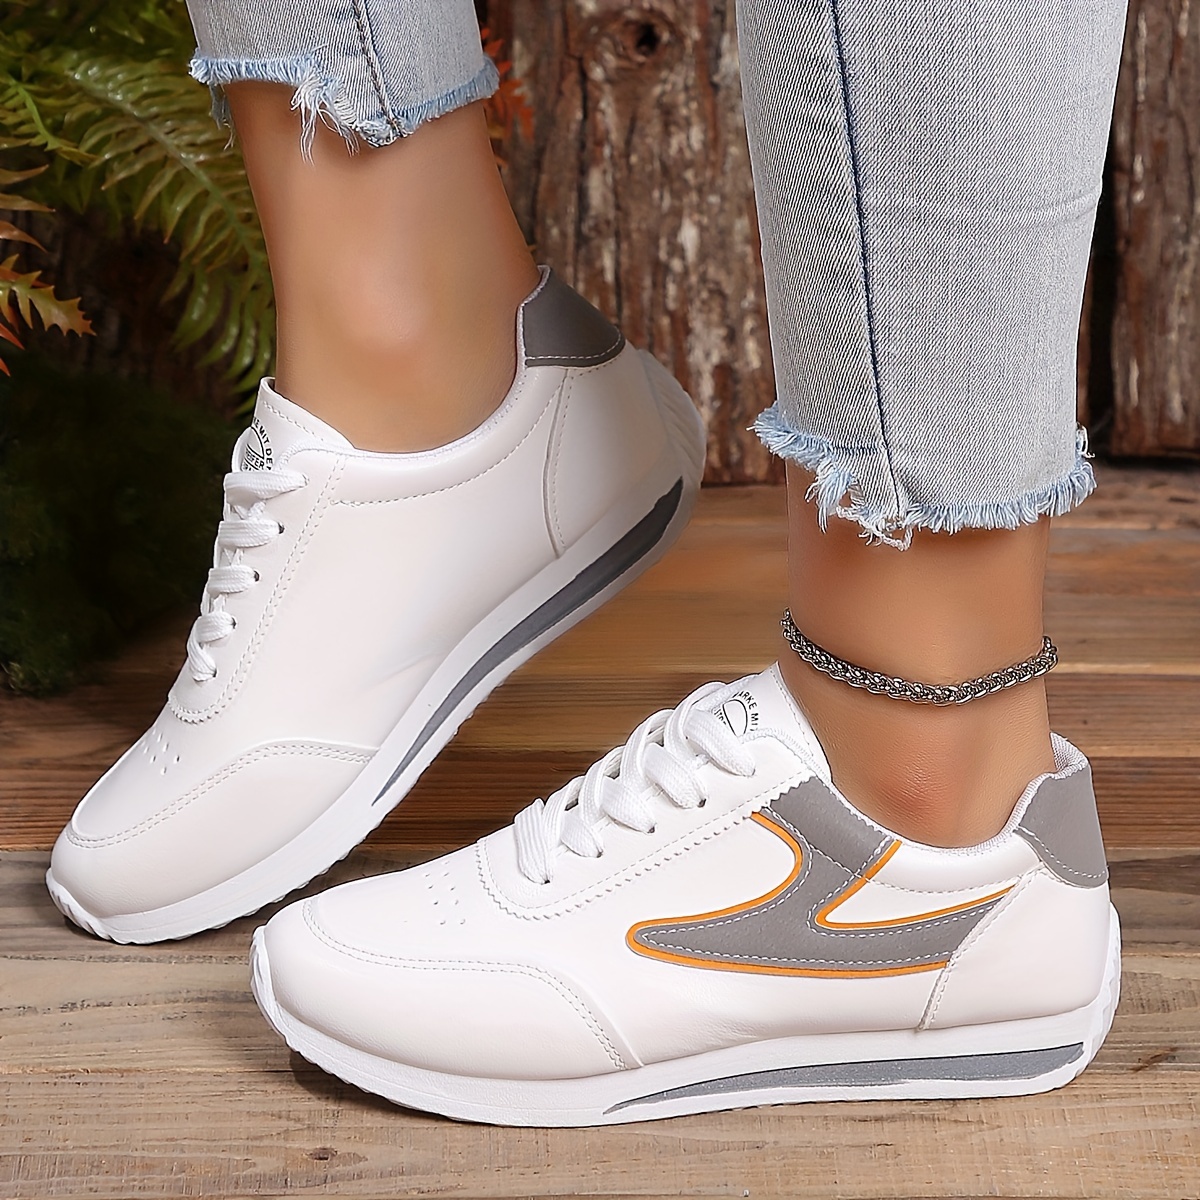 simple flat sneakers women s casual lace outdoor shoes details 6